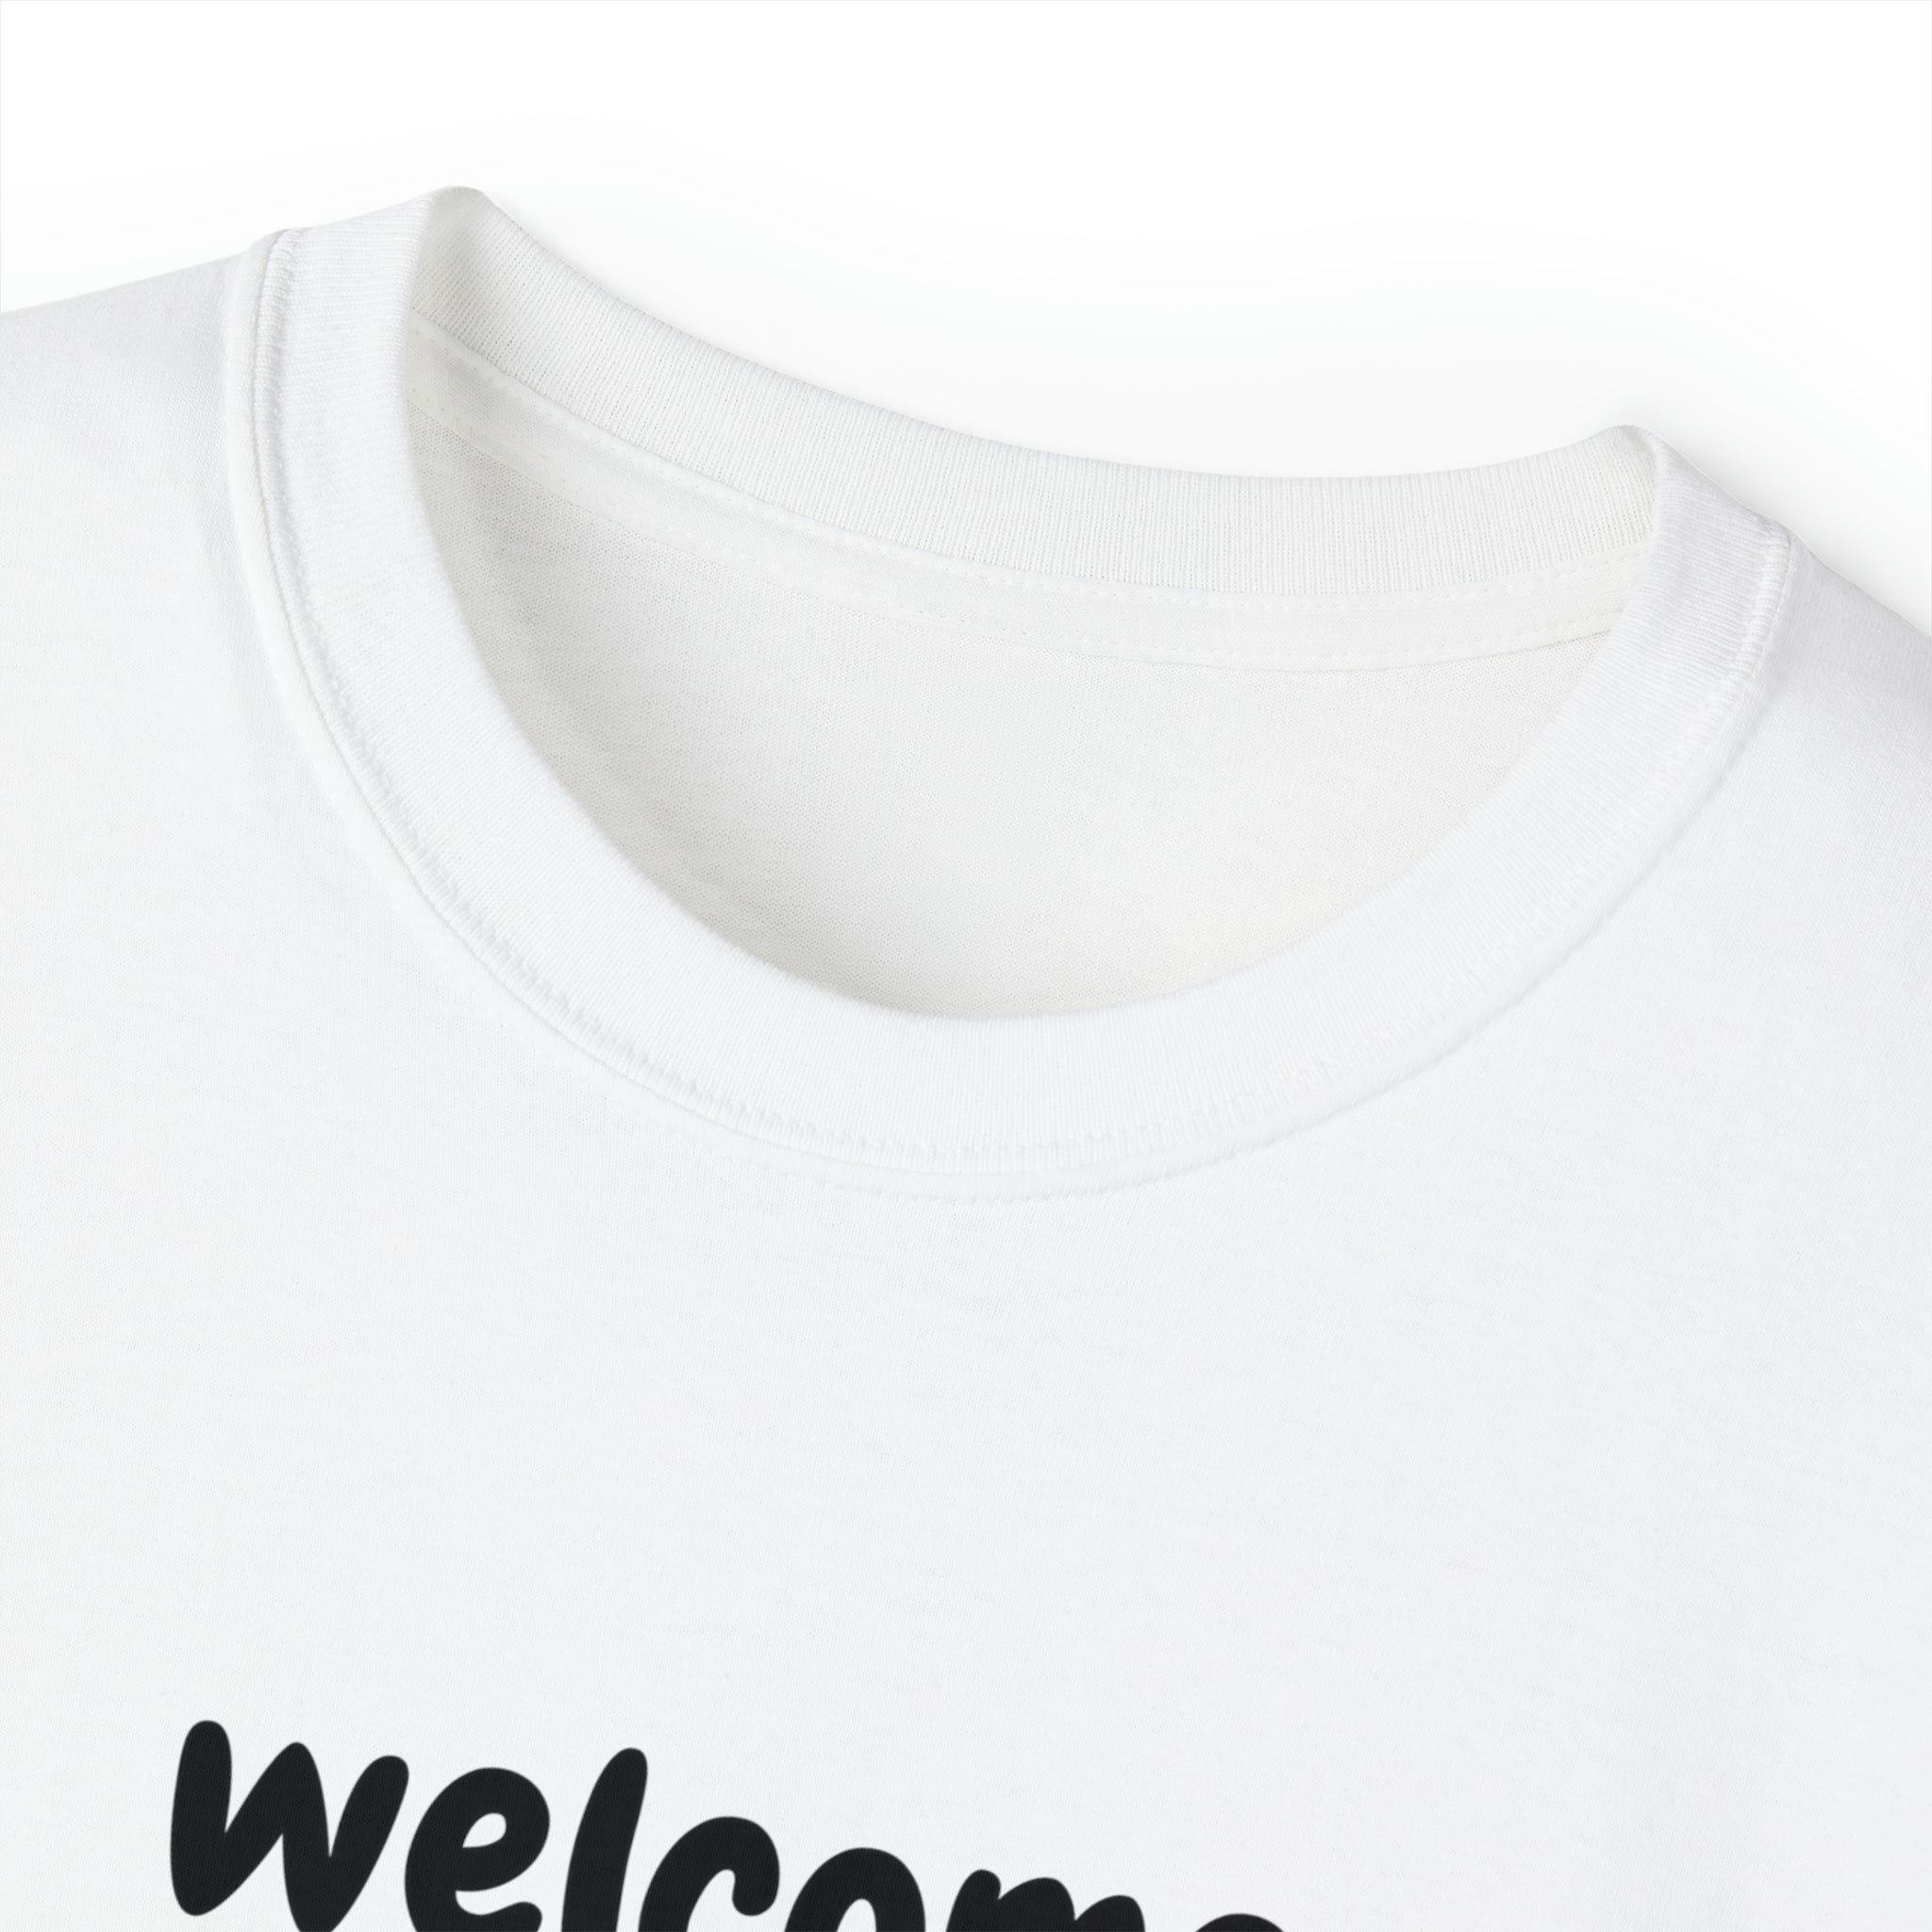 Welcome Little One! - Unisex Shirt